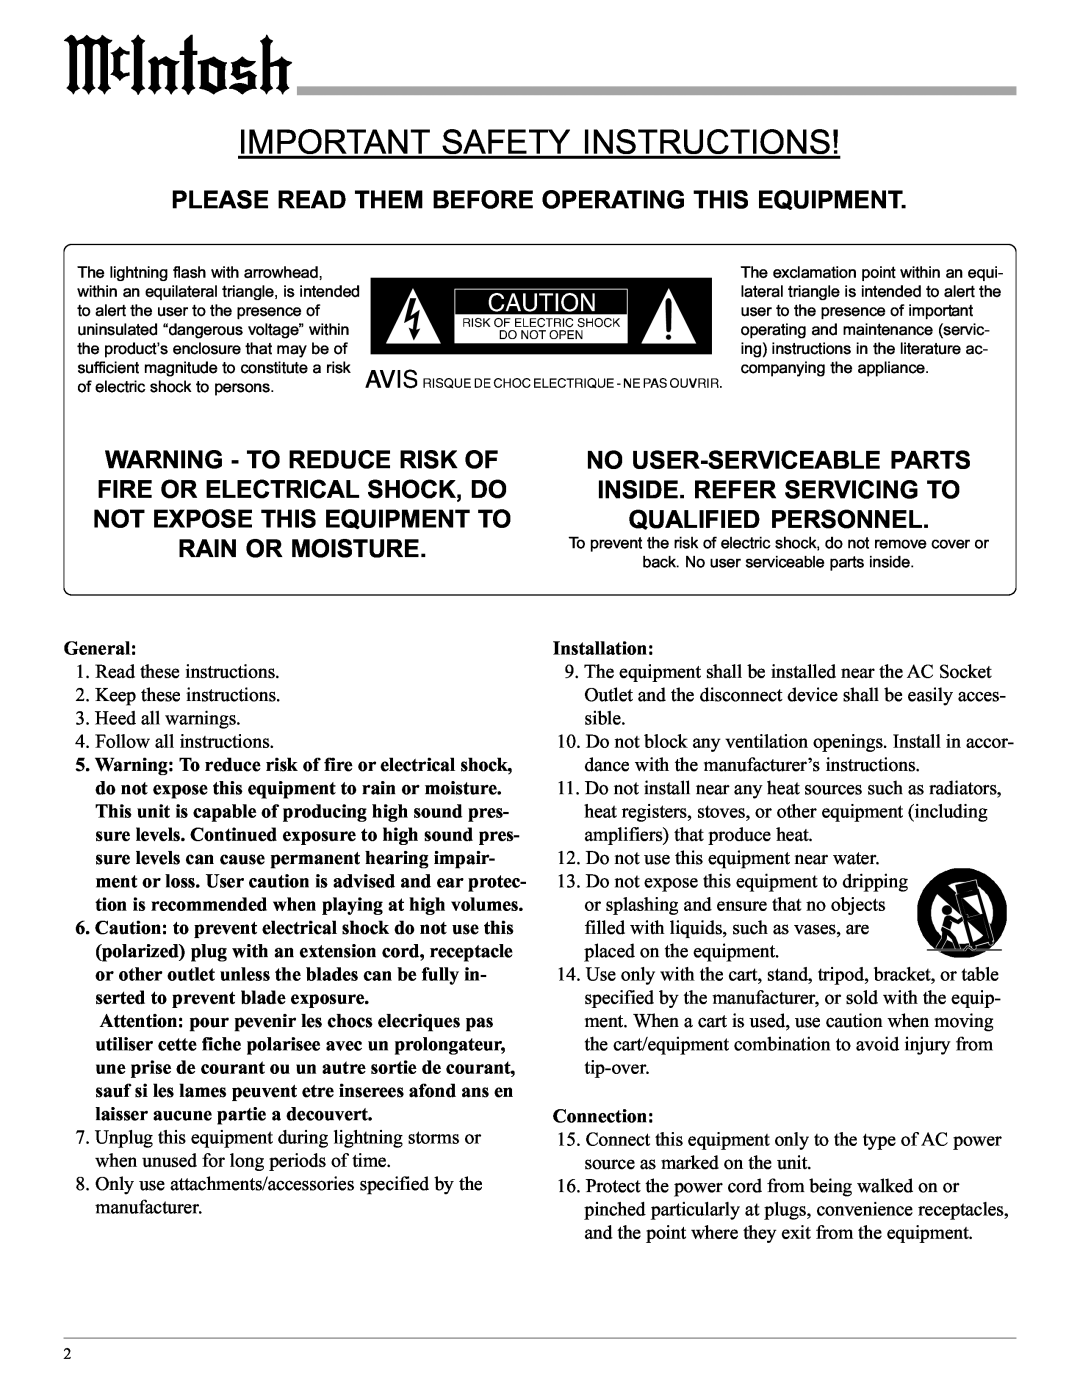 McIntosh MC2102 manual Important Safety Instructions, Please Read Them Before Operating This Equipment 